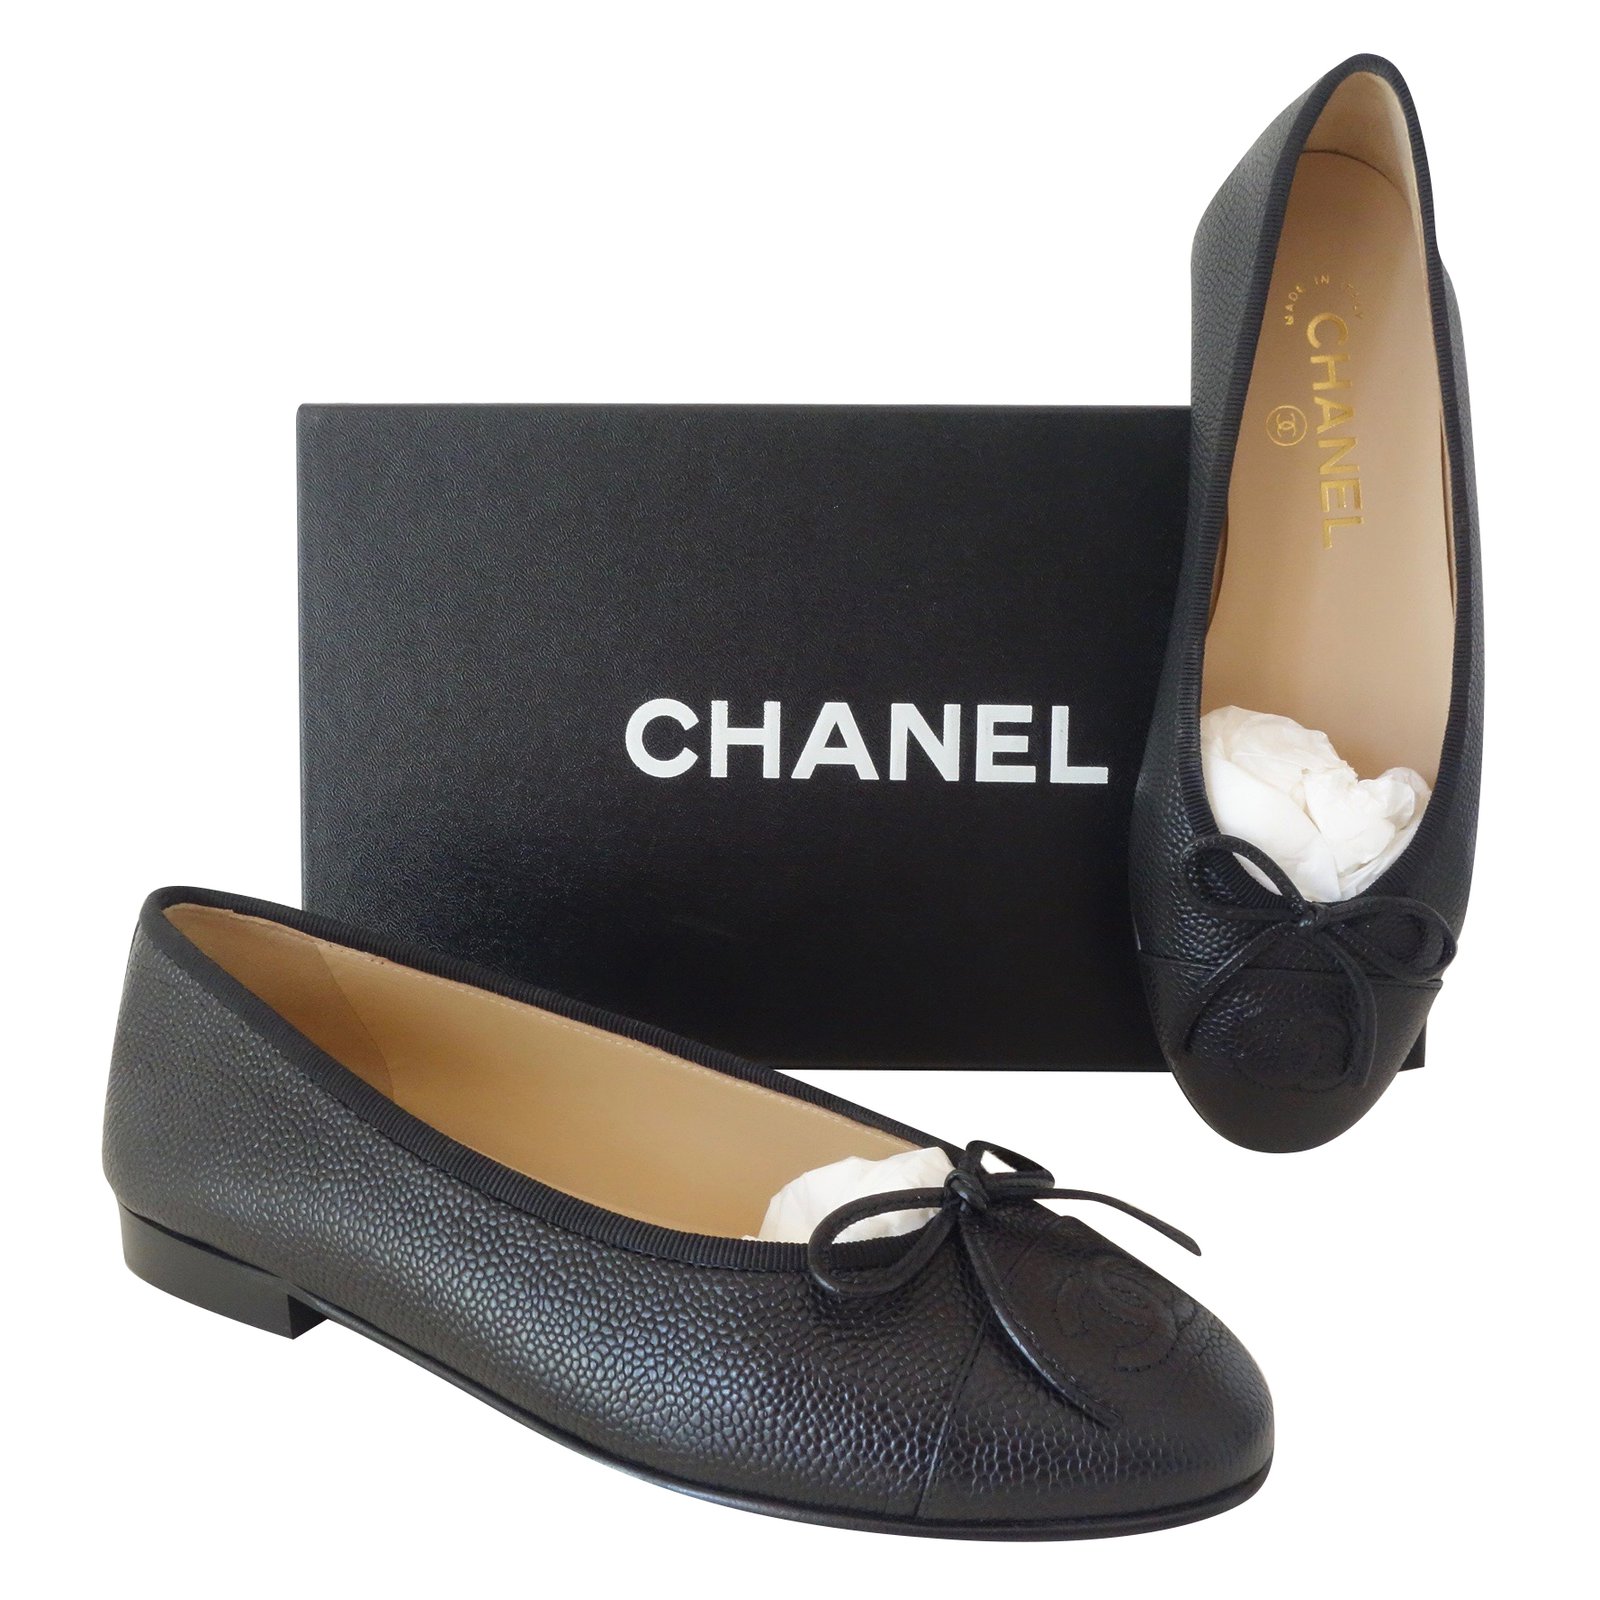 CHANEL LEATHER BALLERINA (grained calf) taille 38 / NEW & NEVER